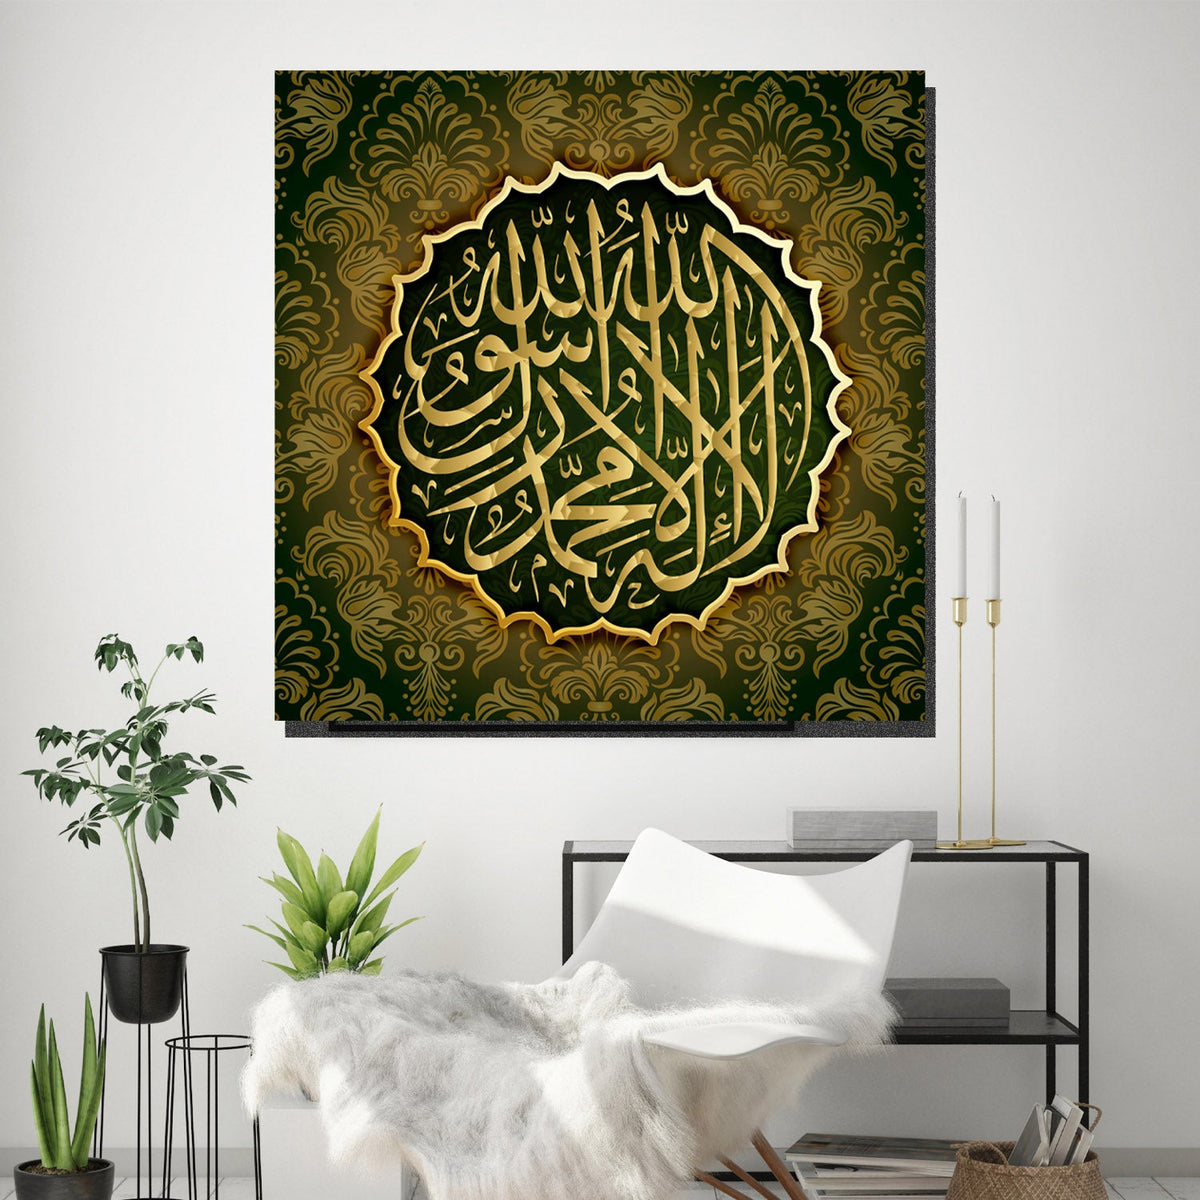 https://cdn.shopify.com/s/files/1/0387/9986/8044/products/BlessedJumahCanvasArtprintStretched-4.jpg